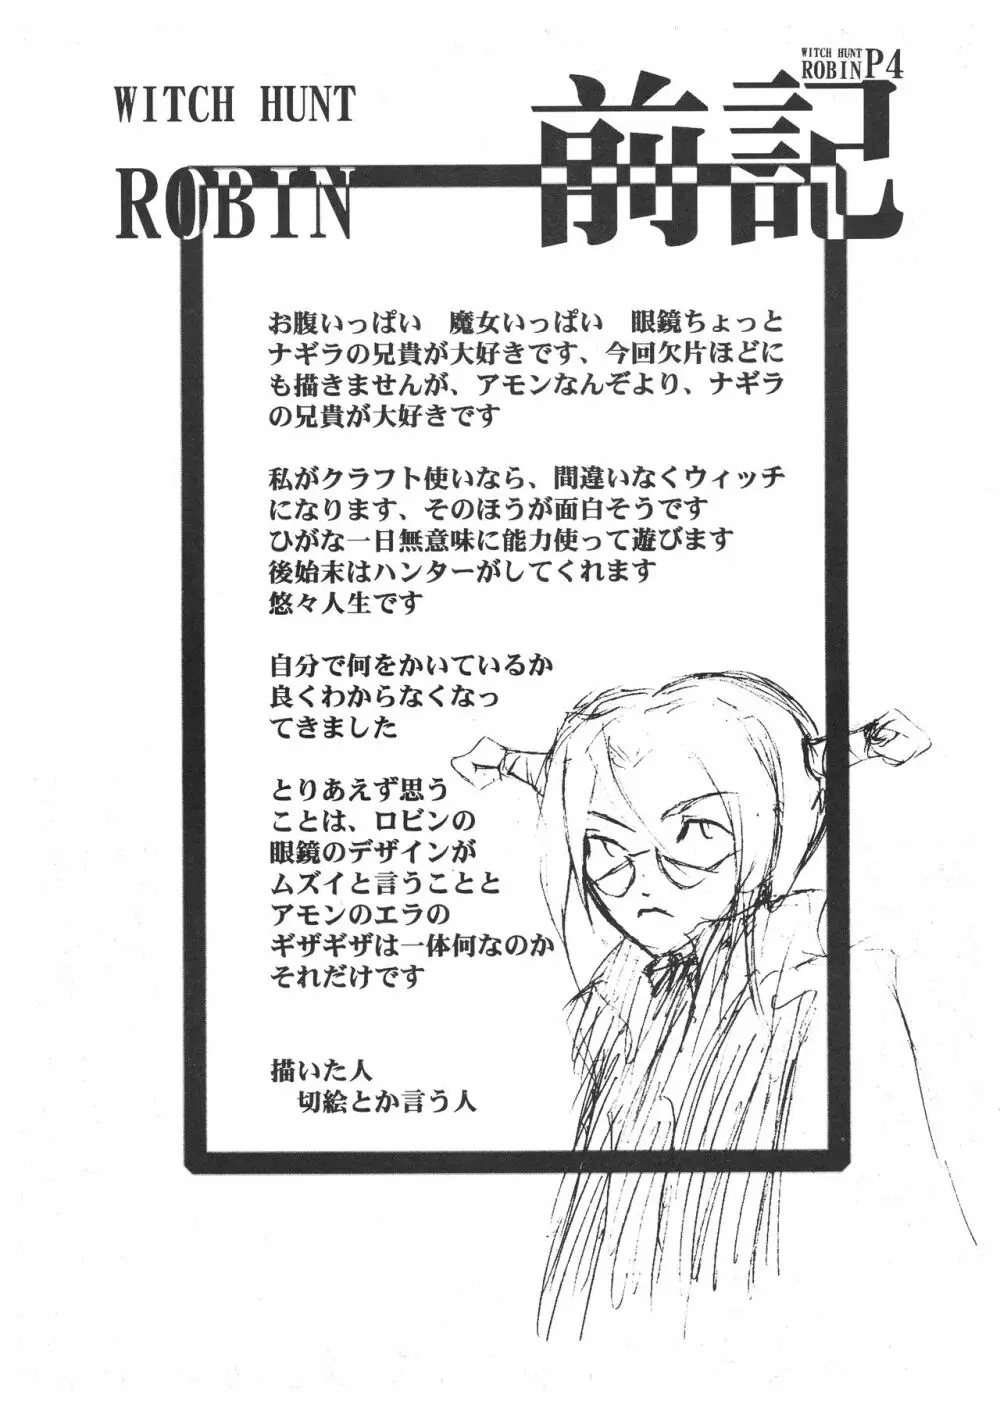 WITCH HUNT ROBIN Page.4